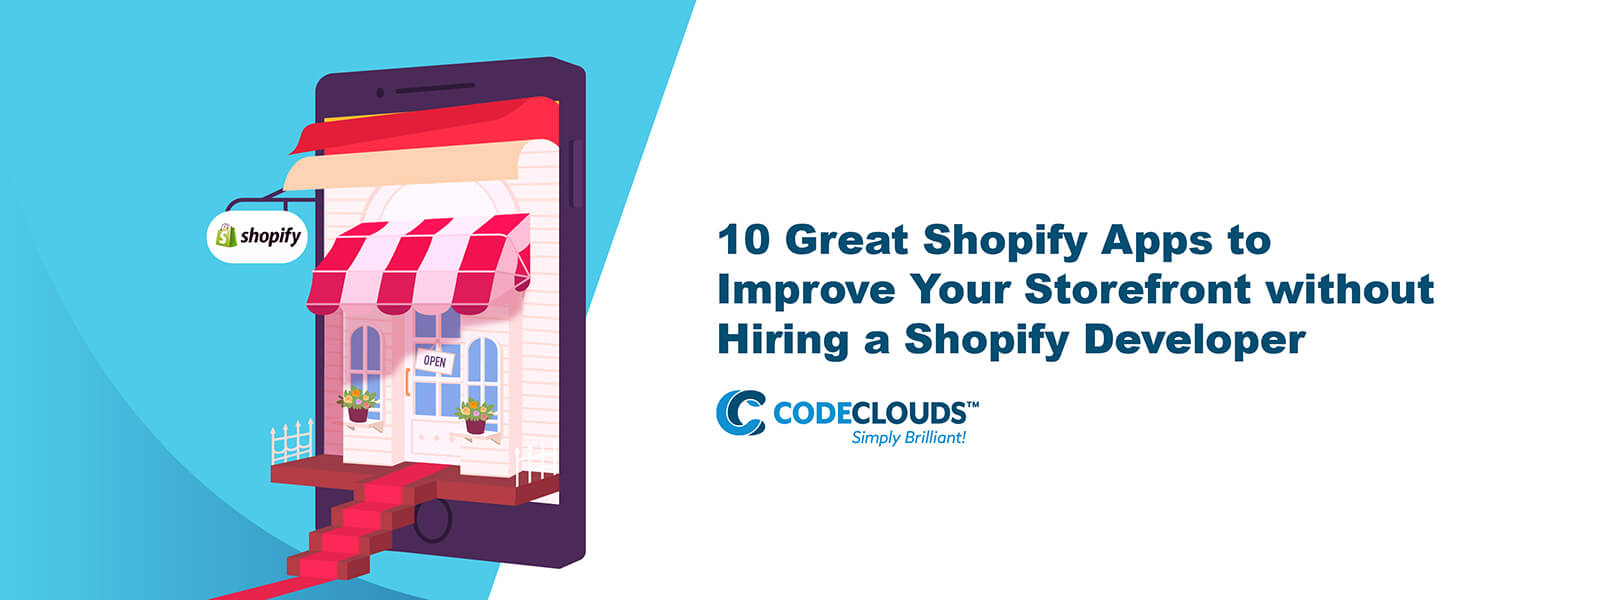 10 Great Shopify Apps